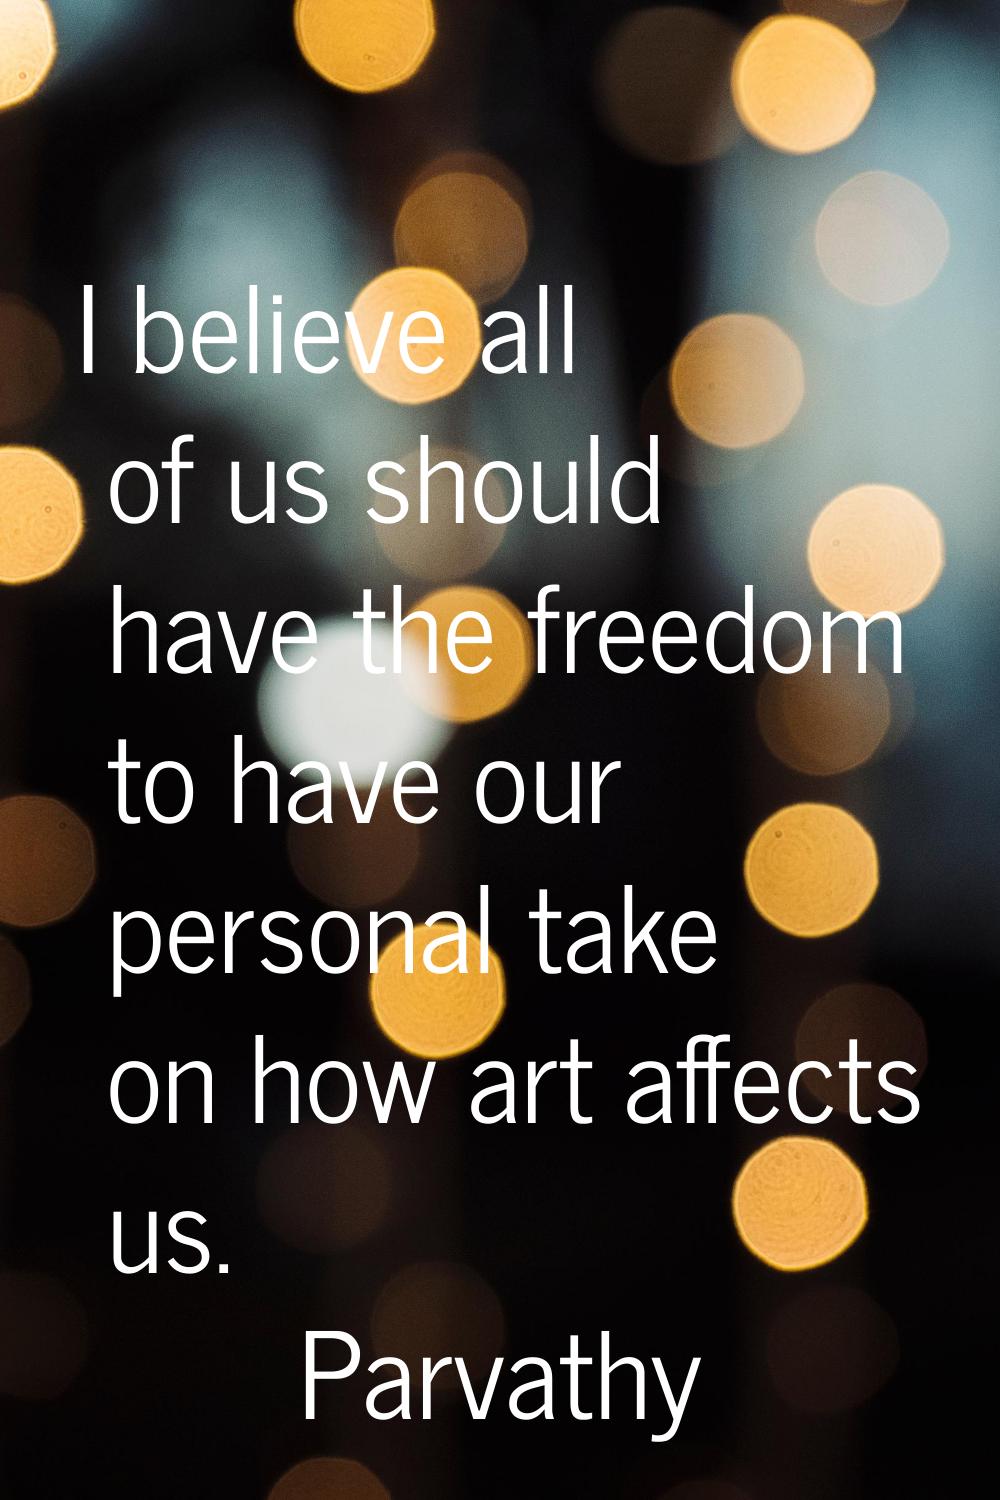 I believe all of us should have the freedom to have our personal take on how art affects us.